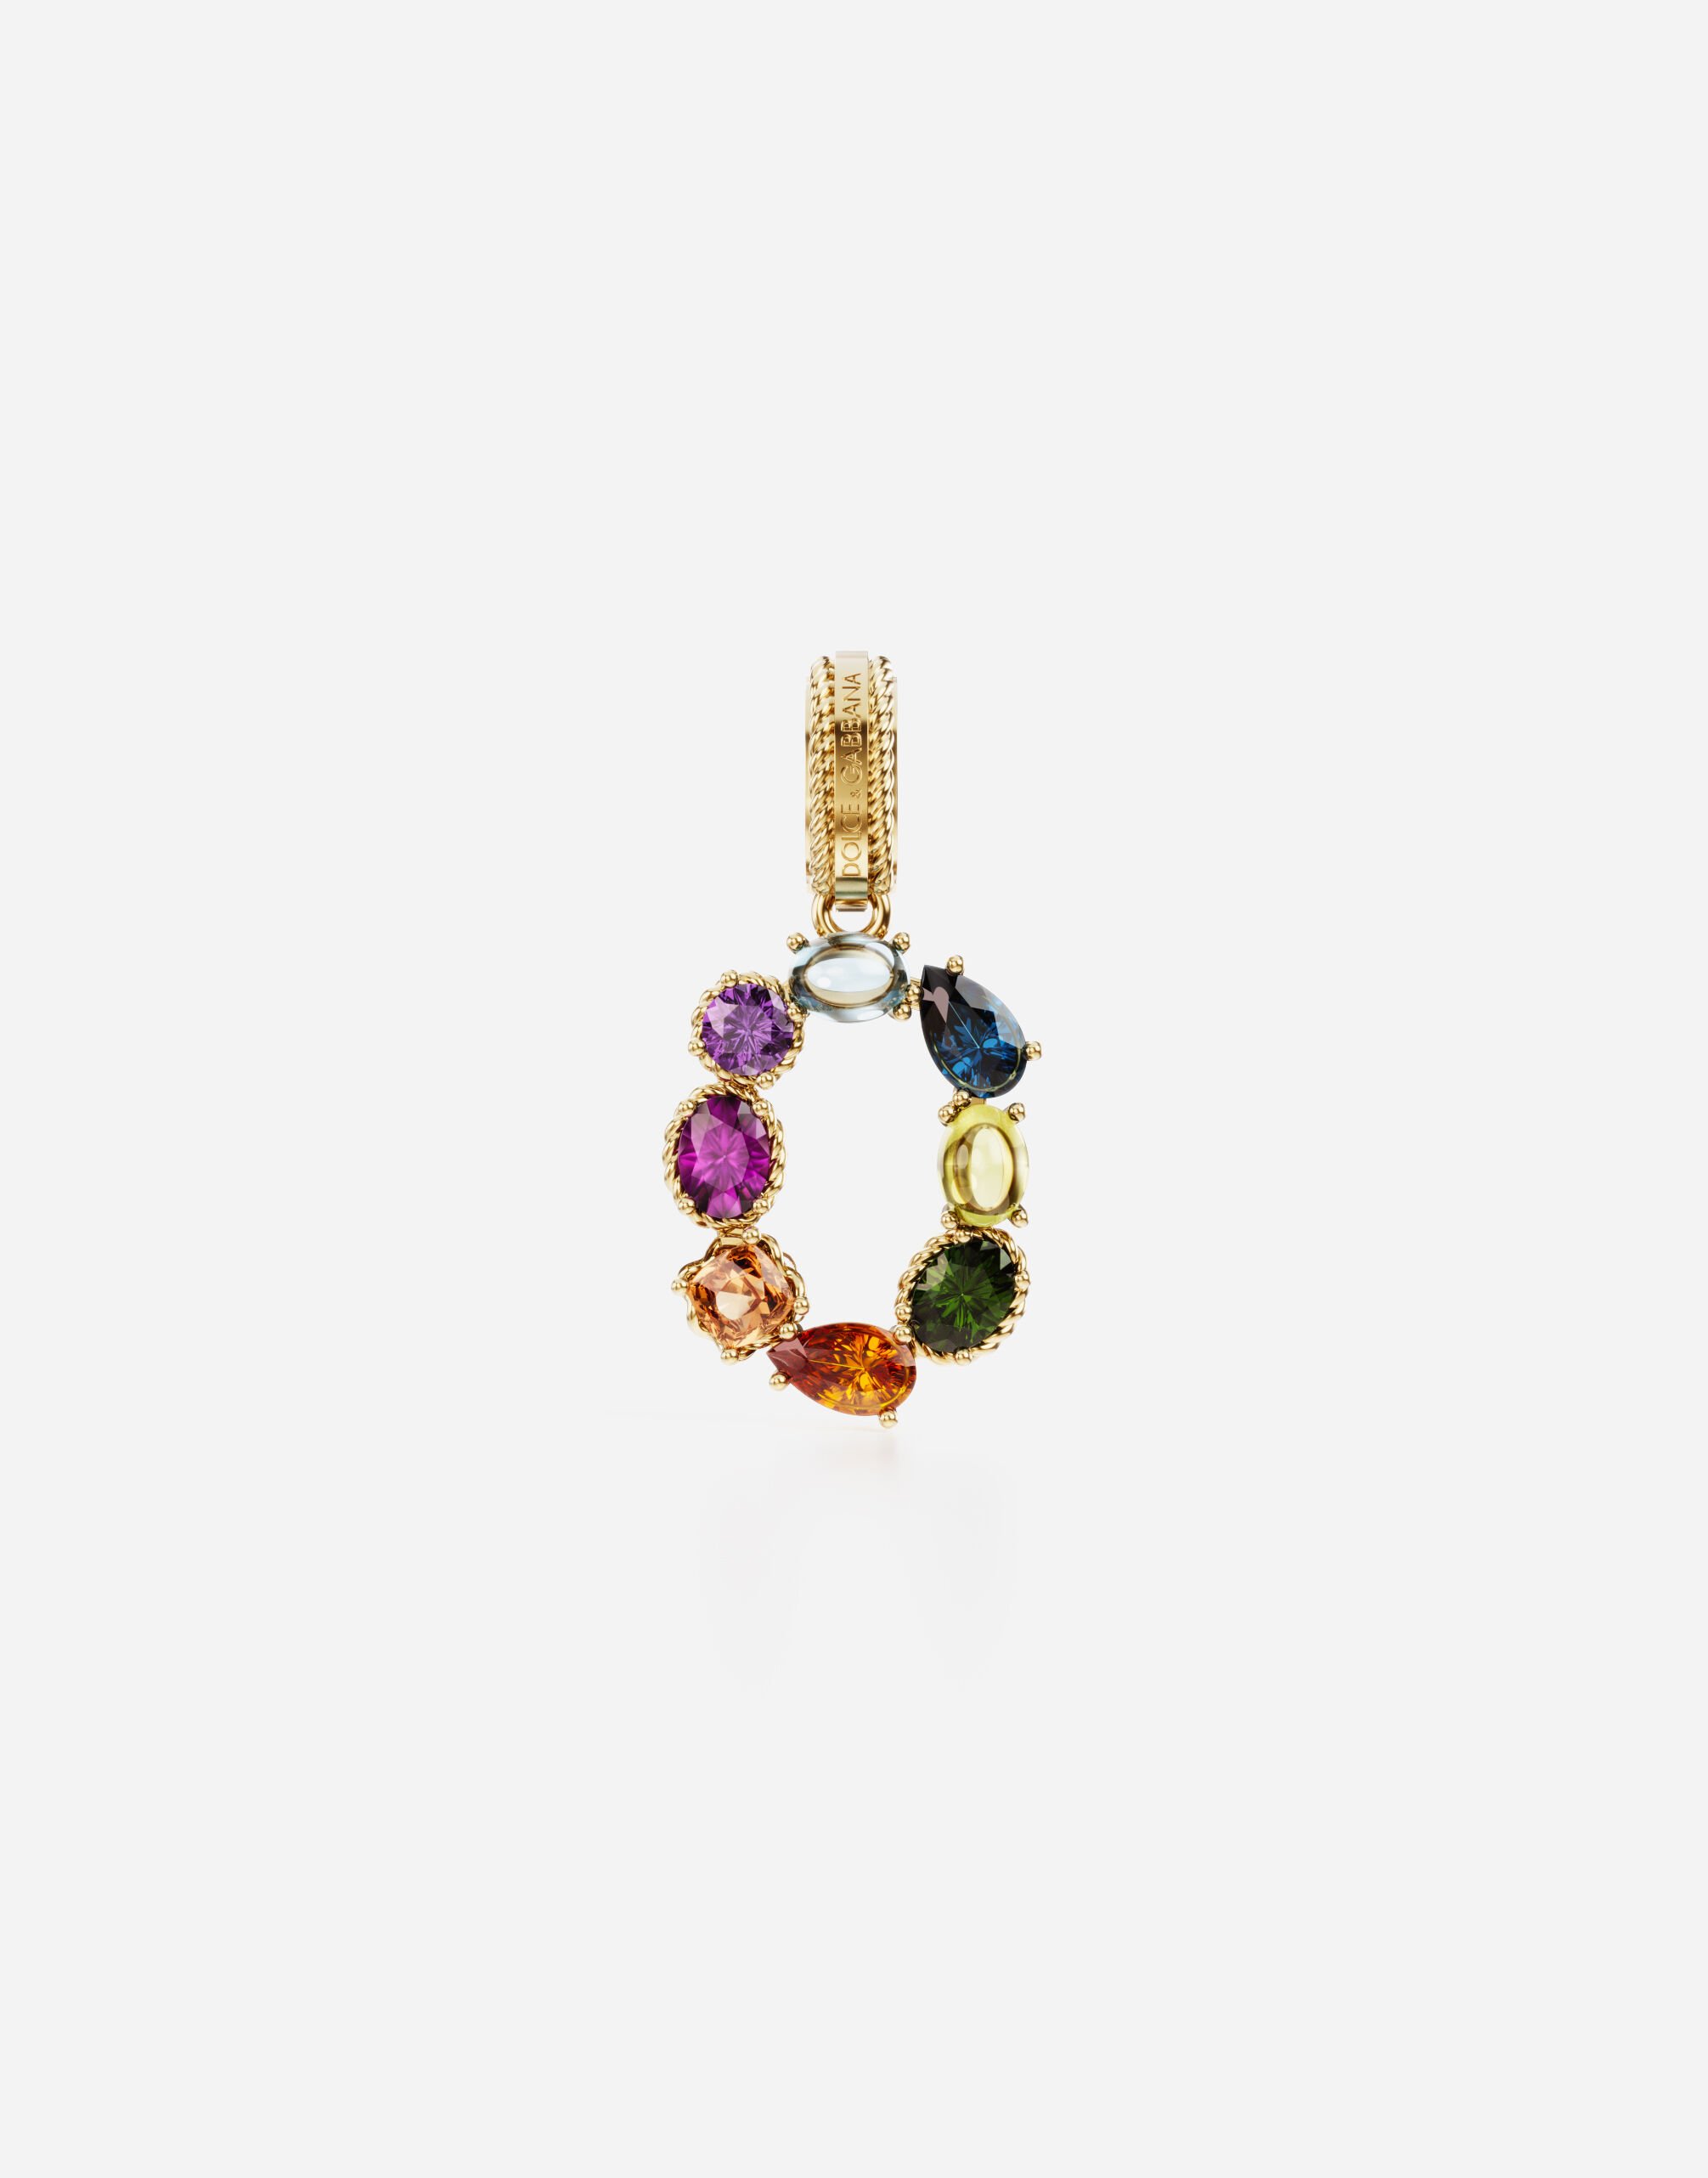 Dolce & Gabbana 18 kt yellow gold rainbow pendant  with multicolor finegemstones representing number 0 Yellow gold WAPR1GWMIX6